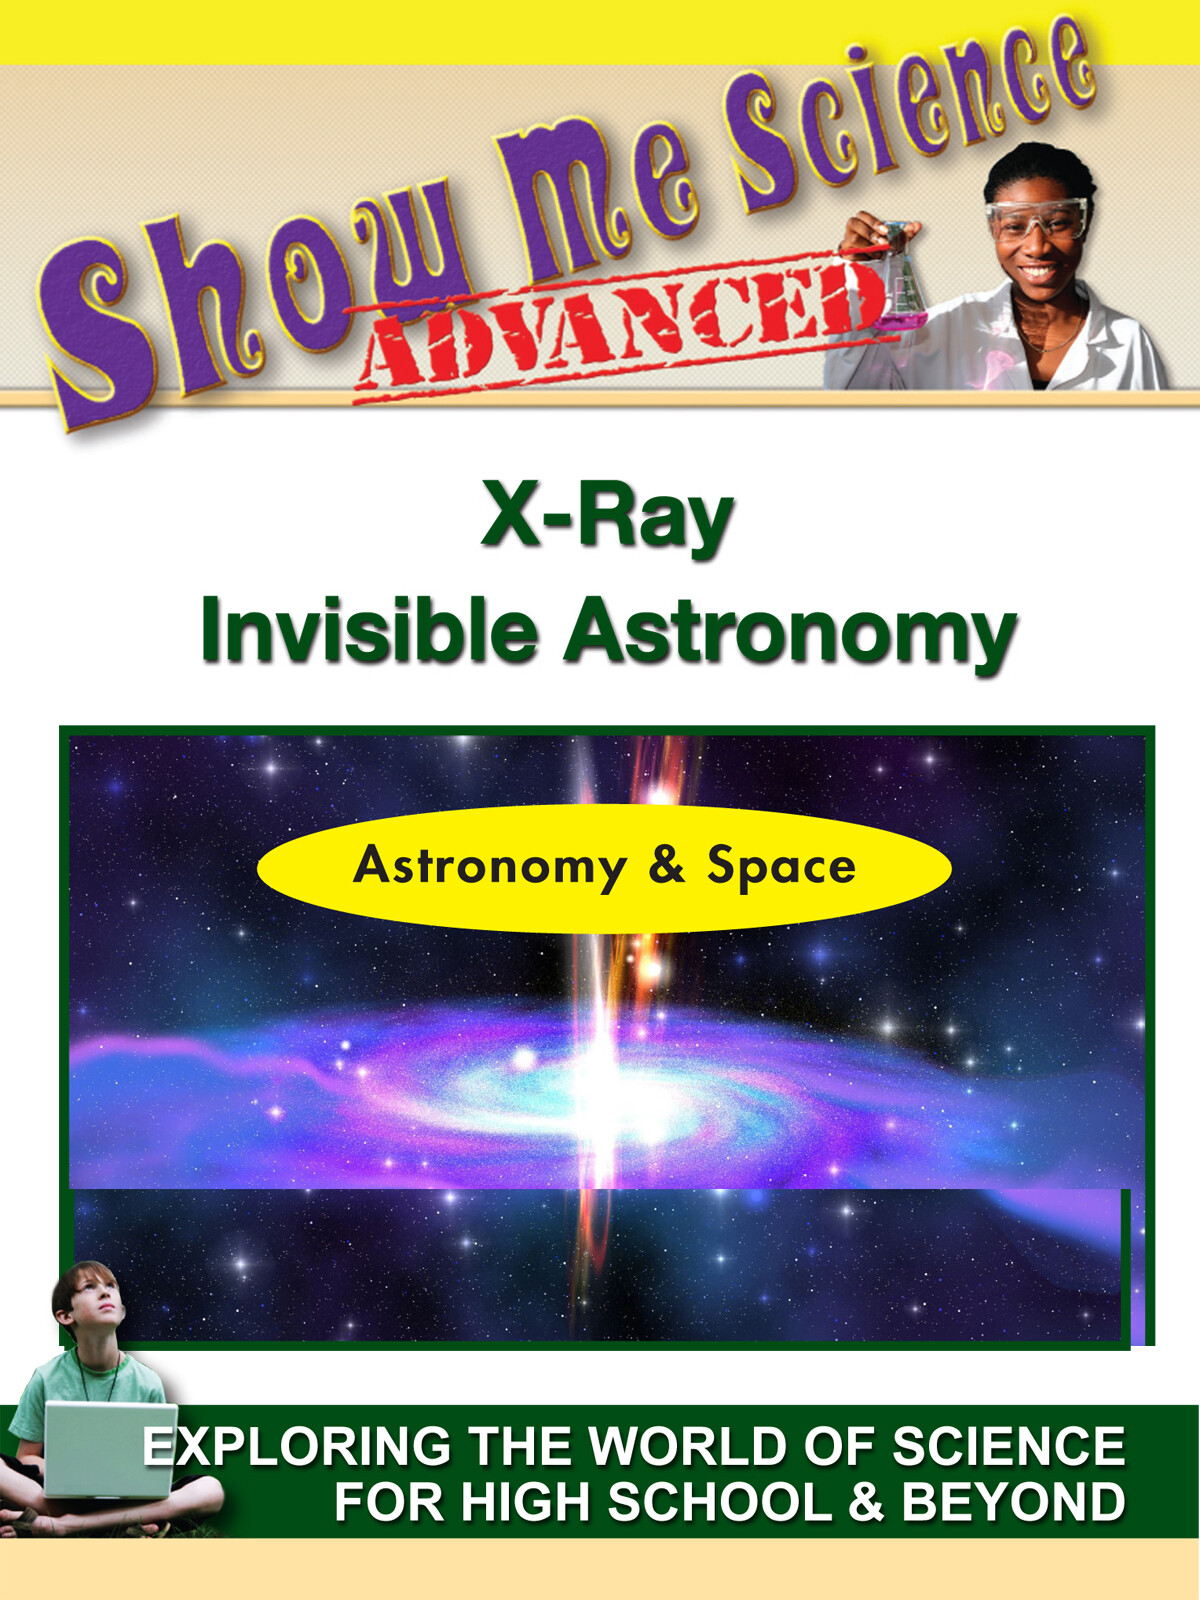 K4618 - Astronomy & Space  XRay Invisible Astronomy